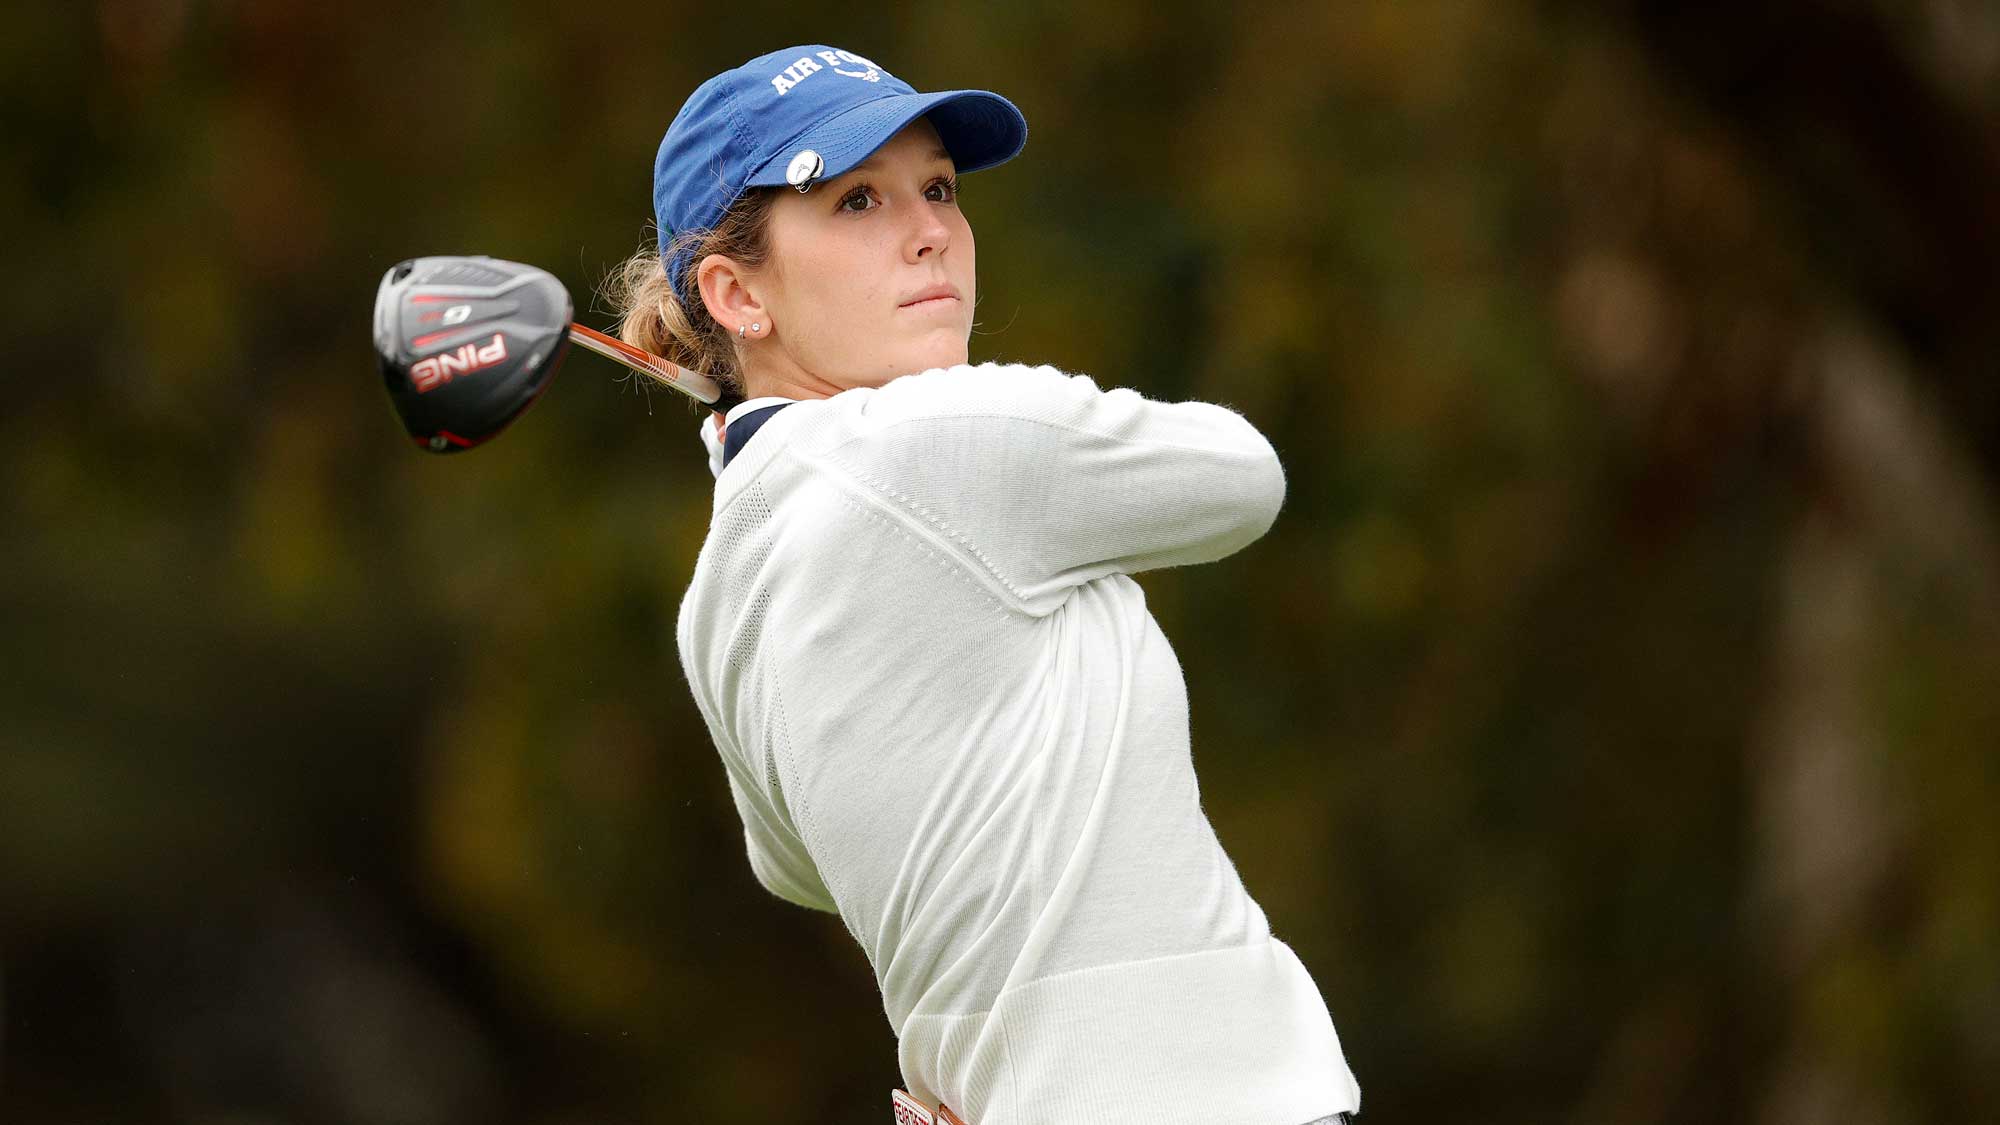 Rachel Heck Gets Off the Road and Onto the Course | LPGA | Ladies ...